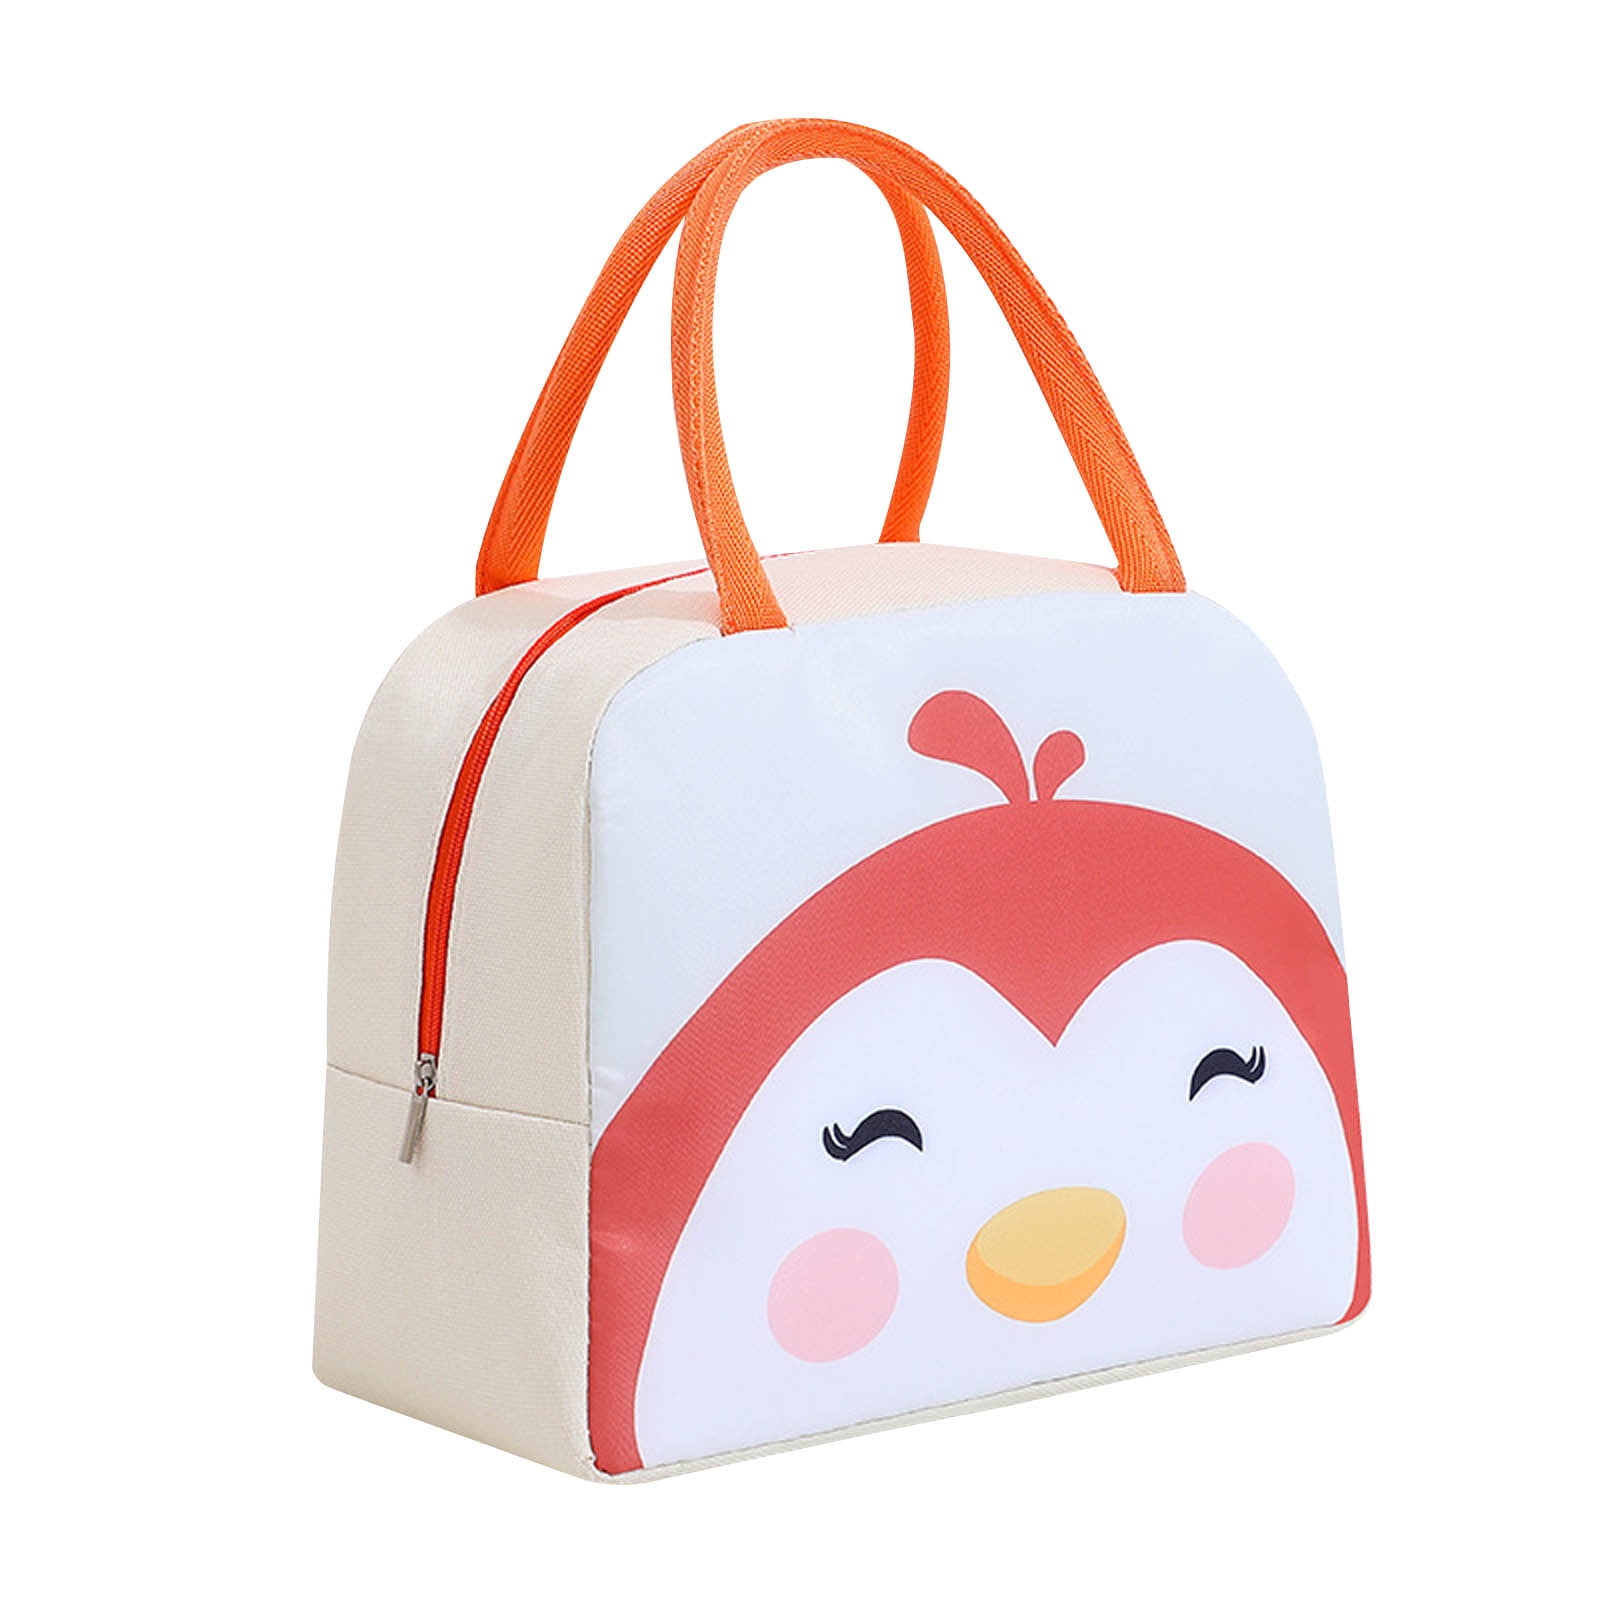 QISIWOLE Insulated Lunch Bag, Durable Freezable Lunch Box for